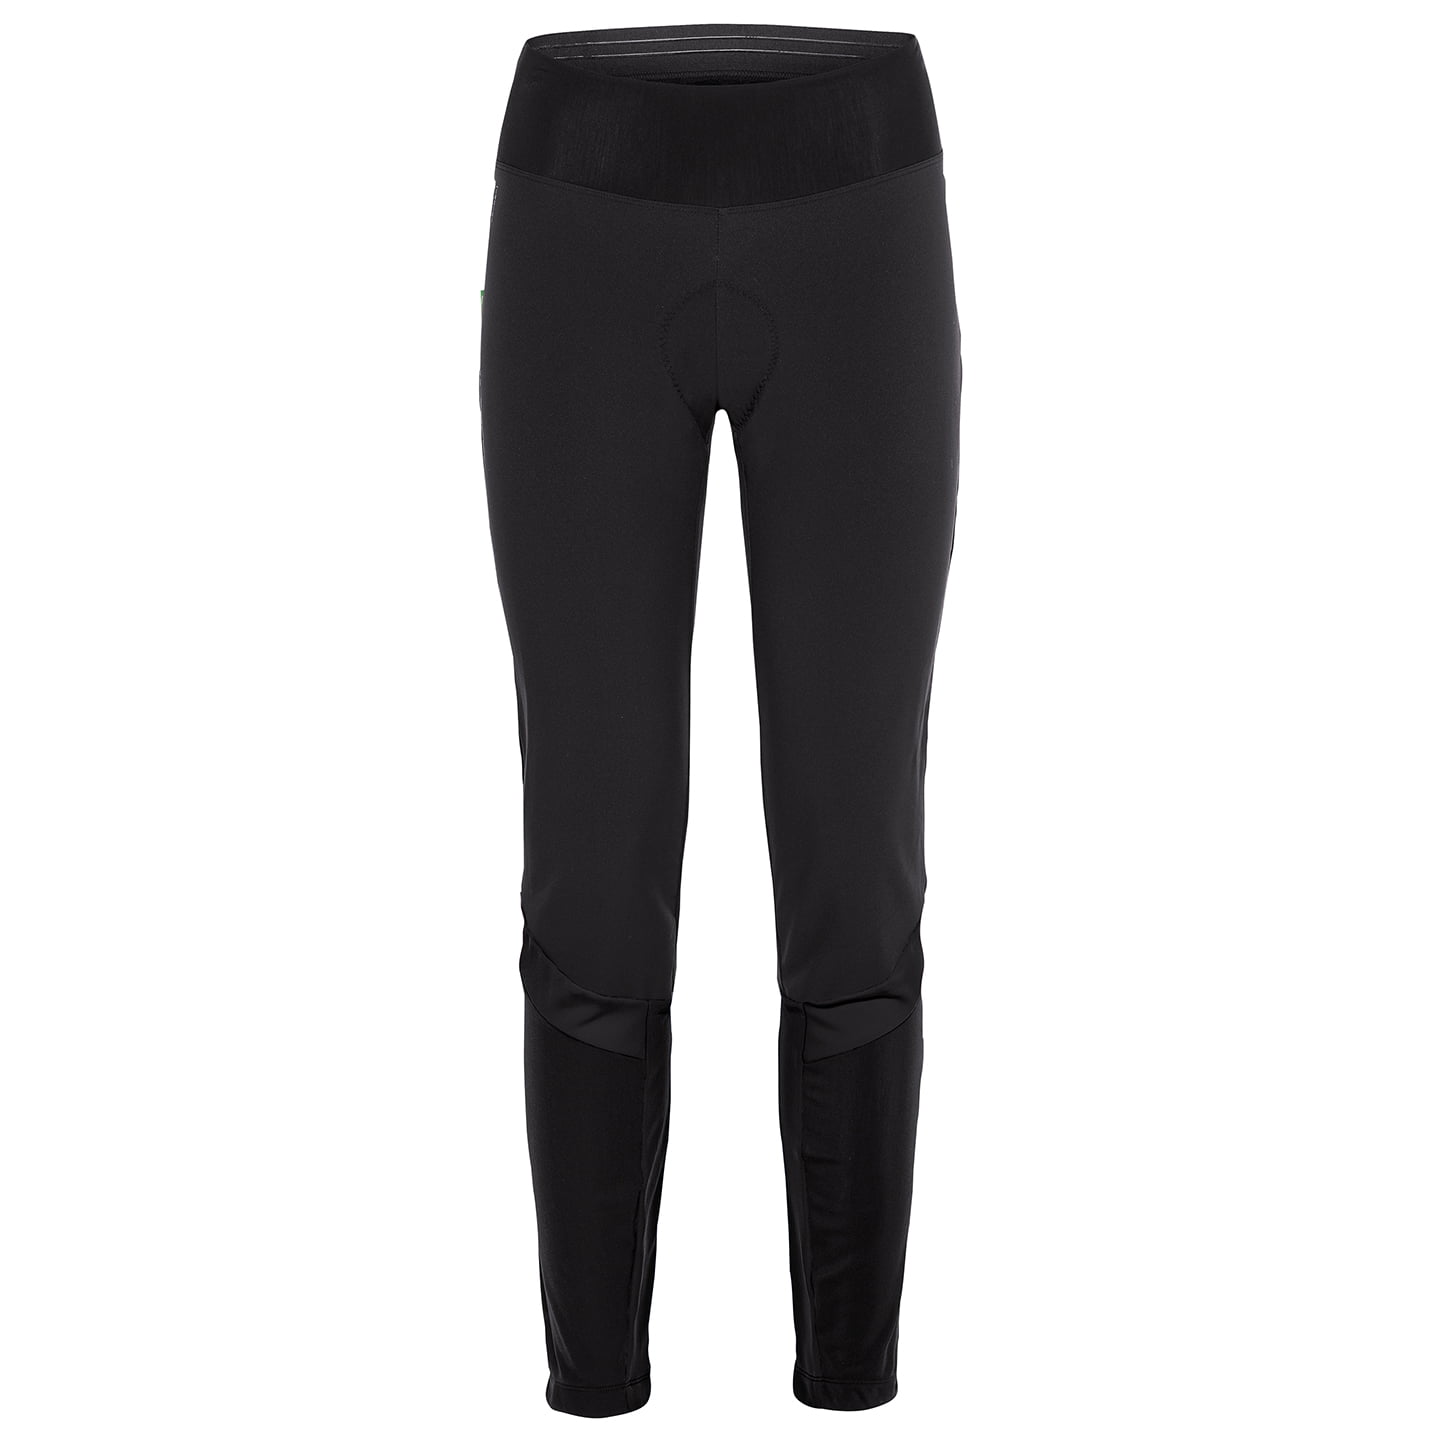 VAUDE long ladies cycling shorts Matera Women’s Cycling Tights, size 42, Cycle trousers, Cycle wear